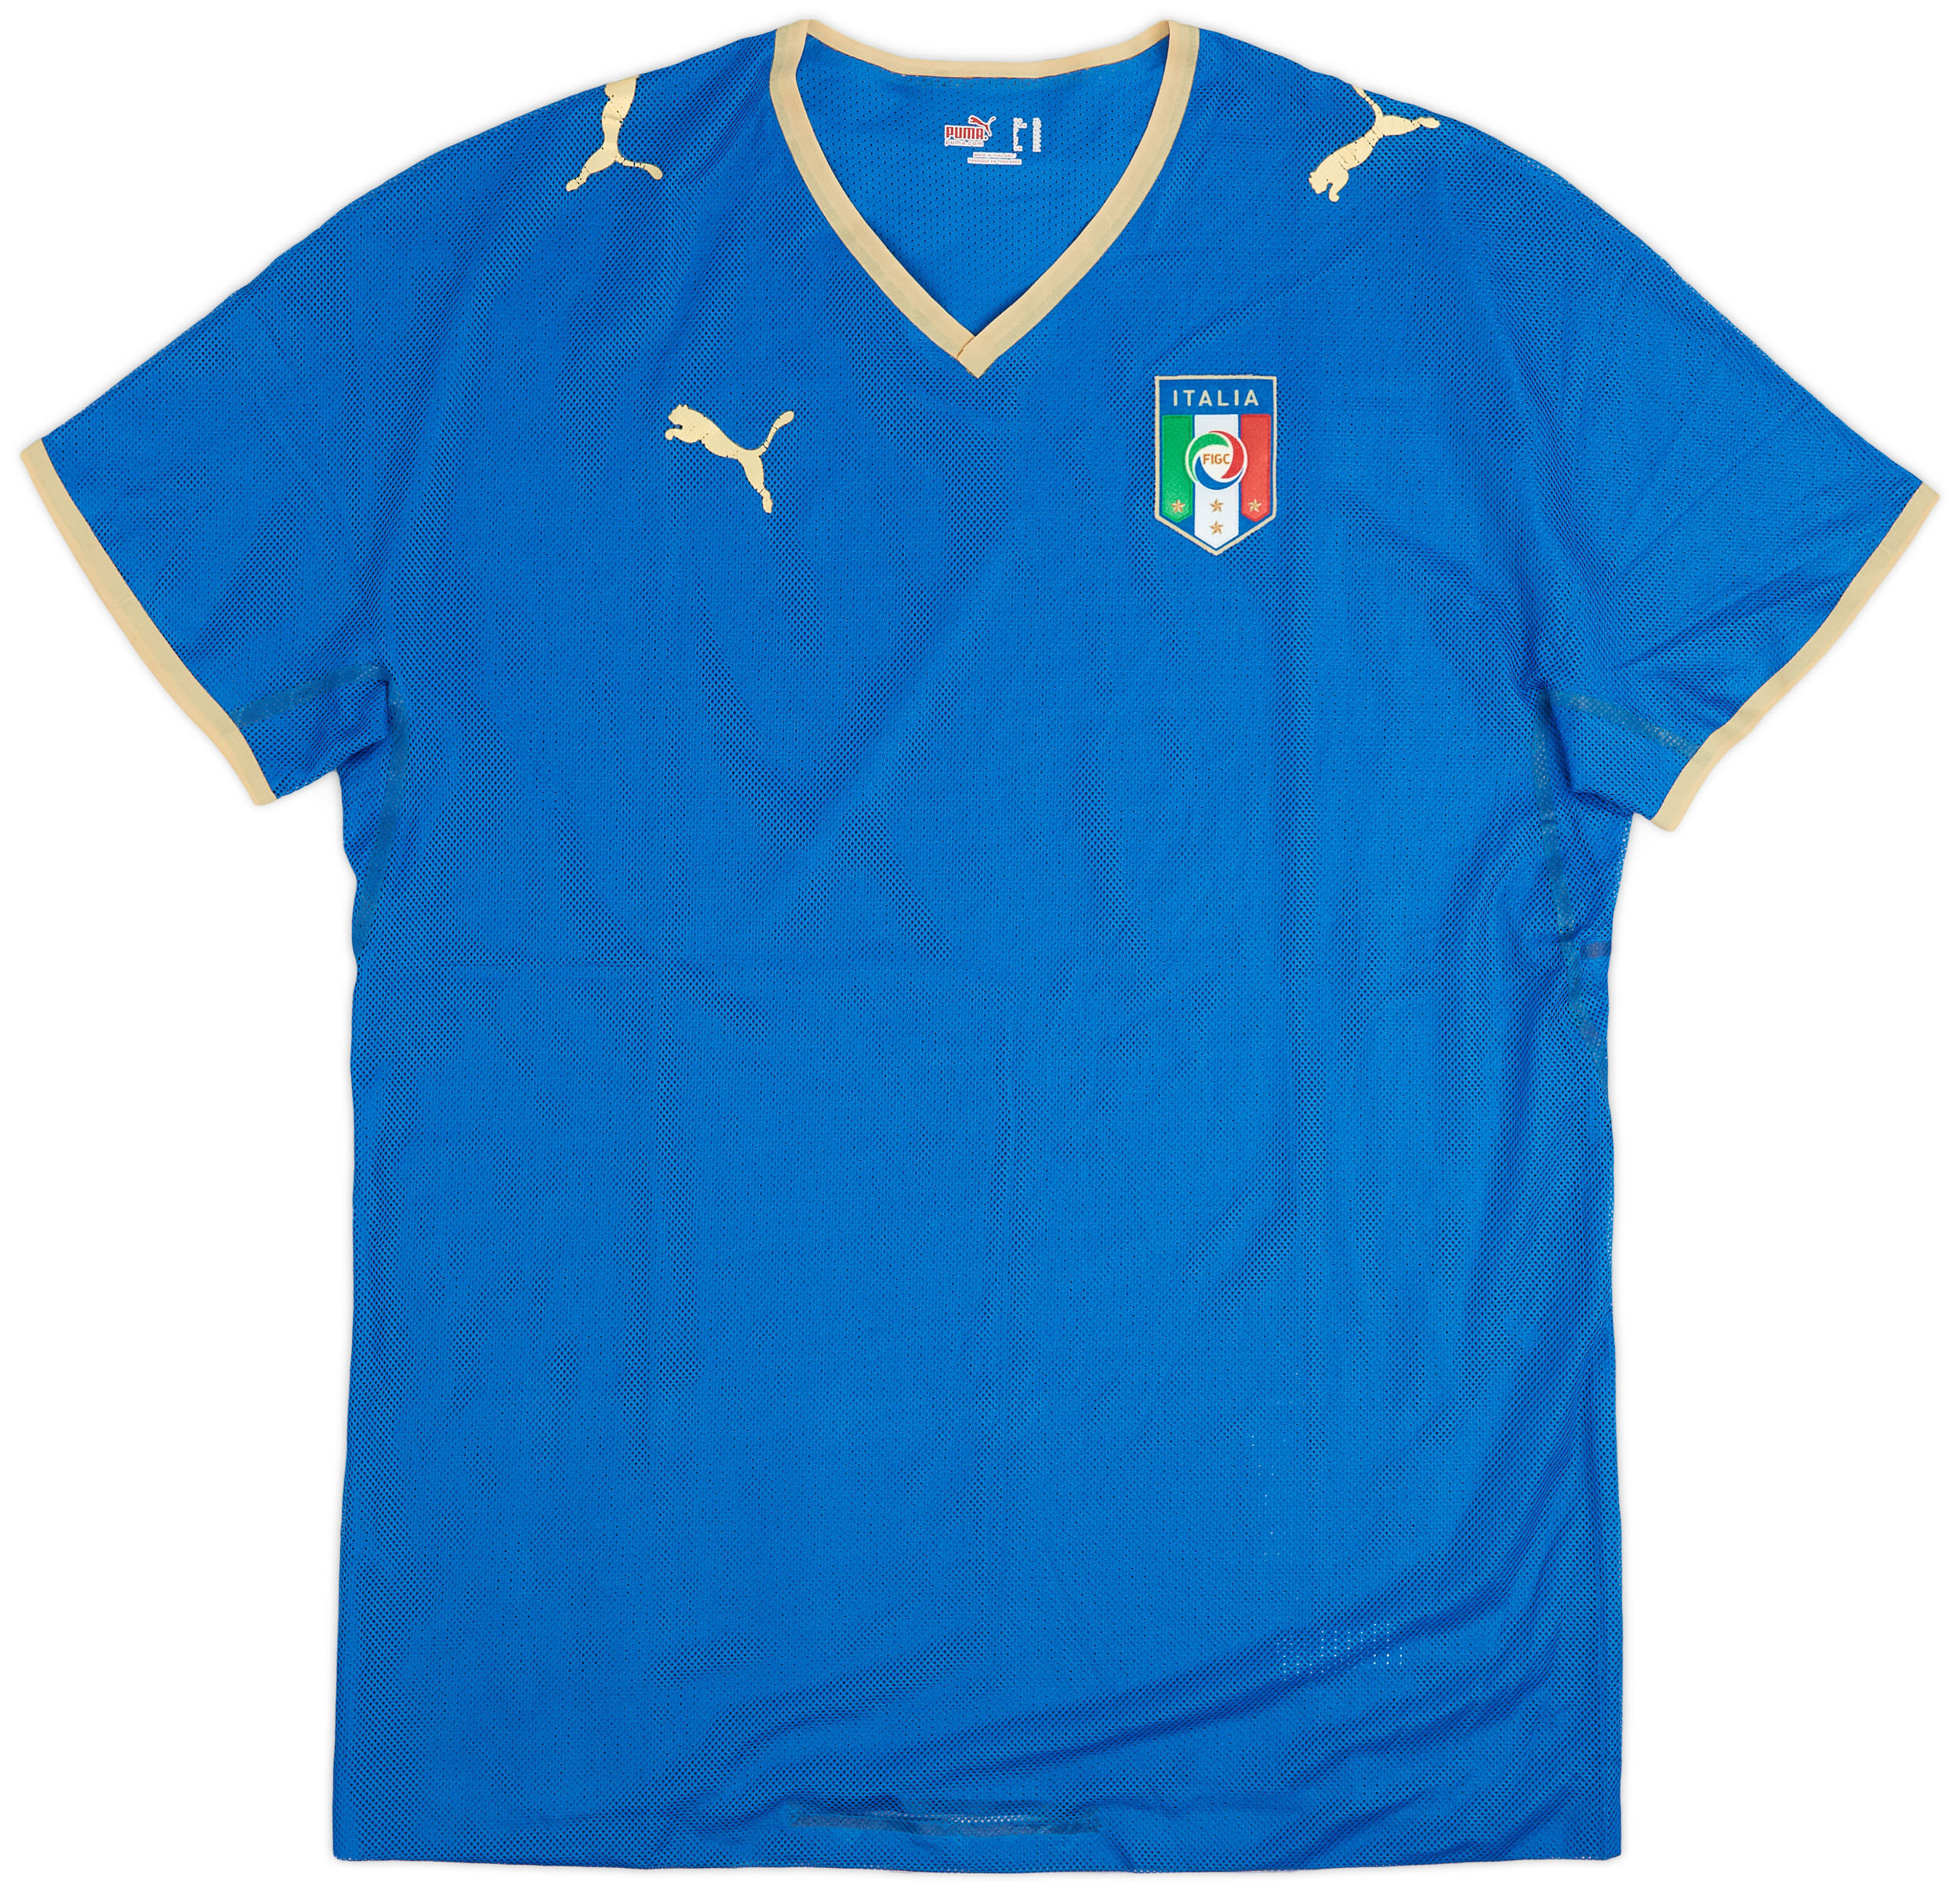 2007-08 Italy Player Issue Home Shirt - 8/10 - ()